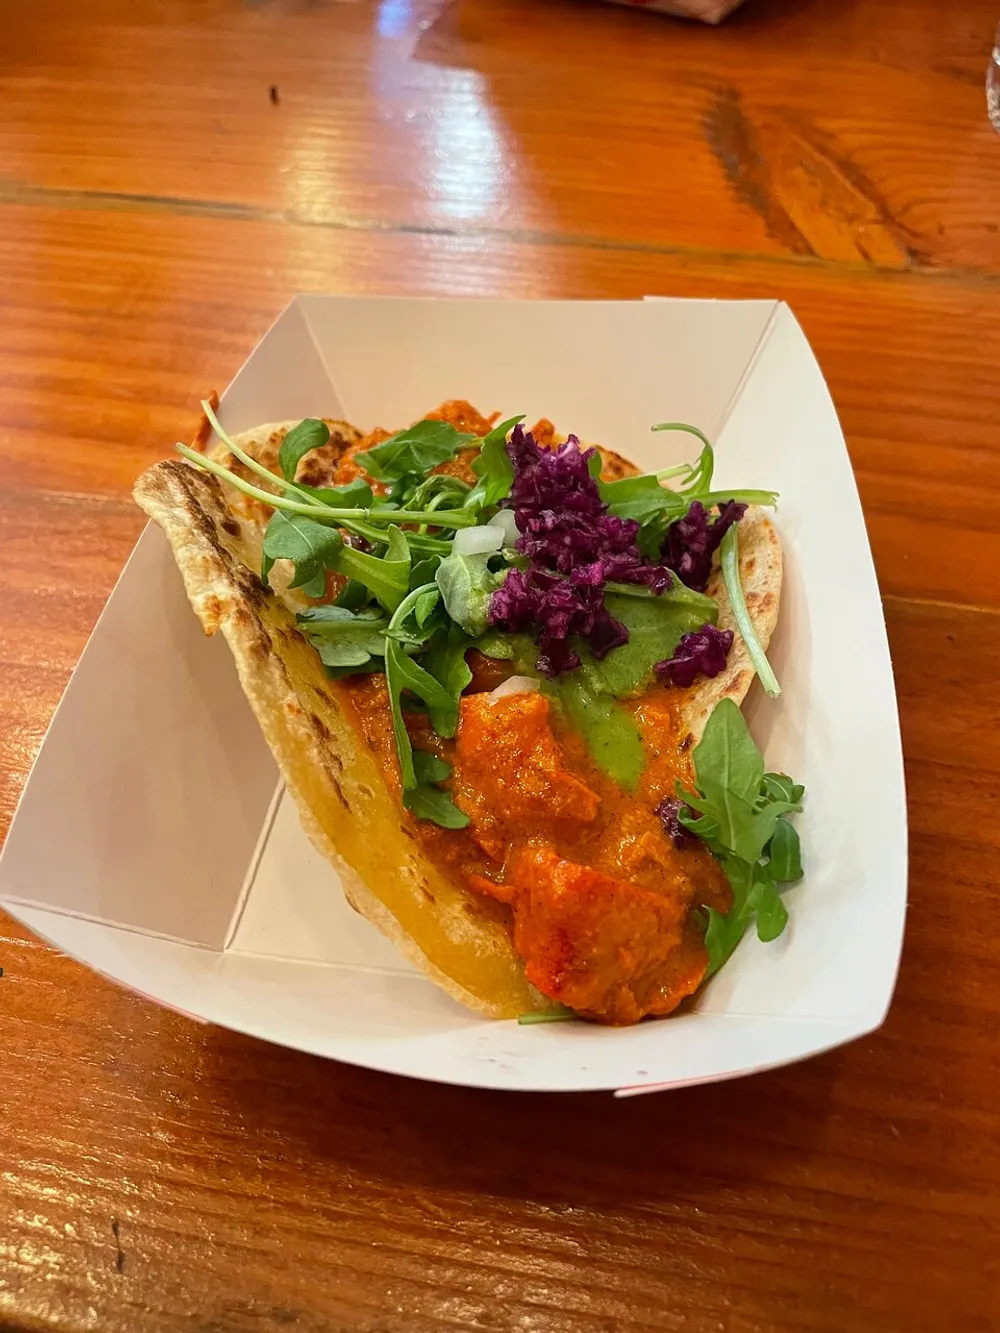 The image shows a colorful taco with a variety of fillings including what appears to be a creamy sauce and fresh greens served in a white paper tray on a wooden table